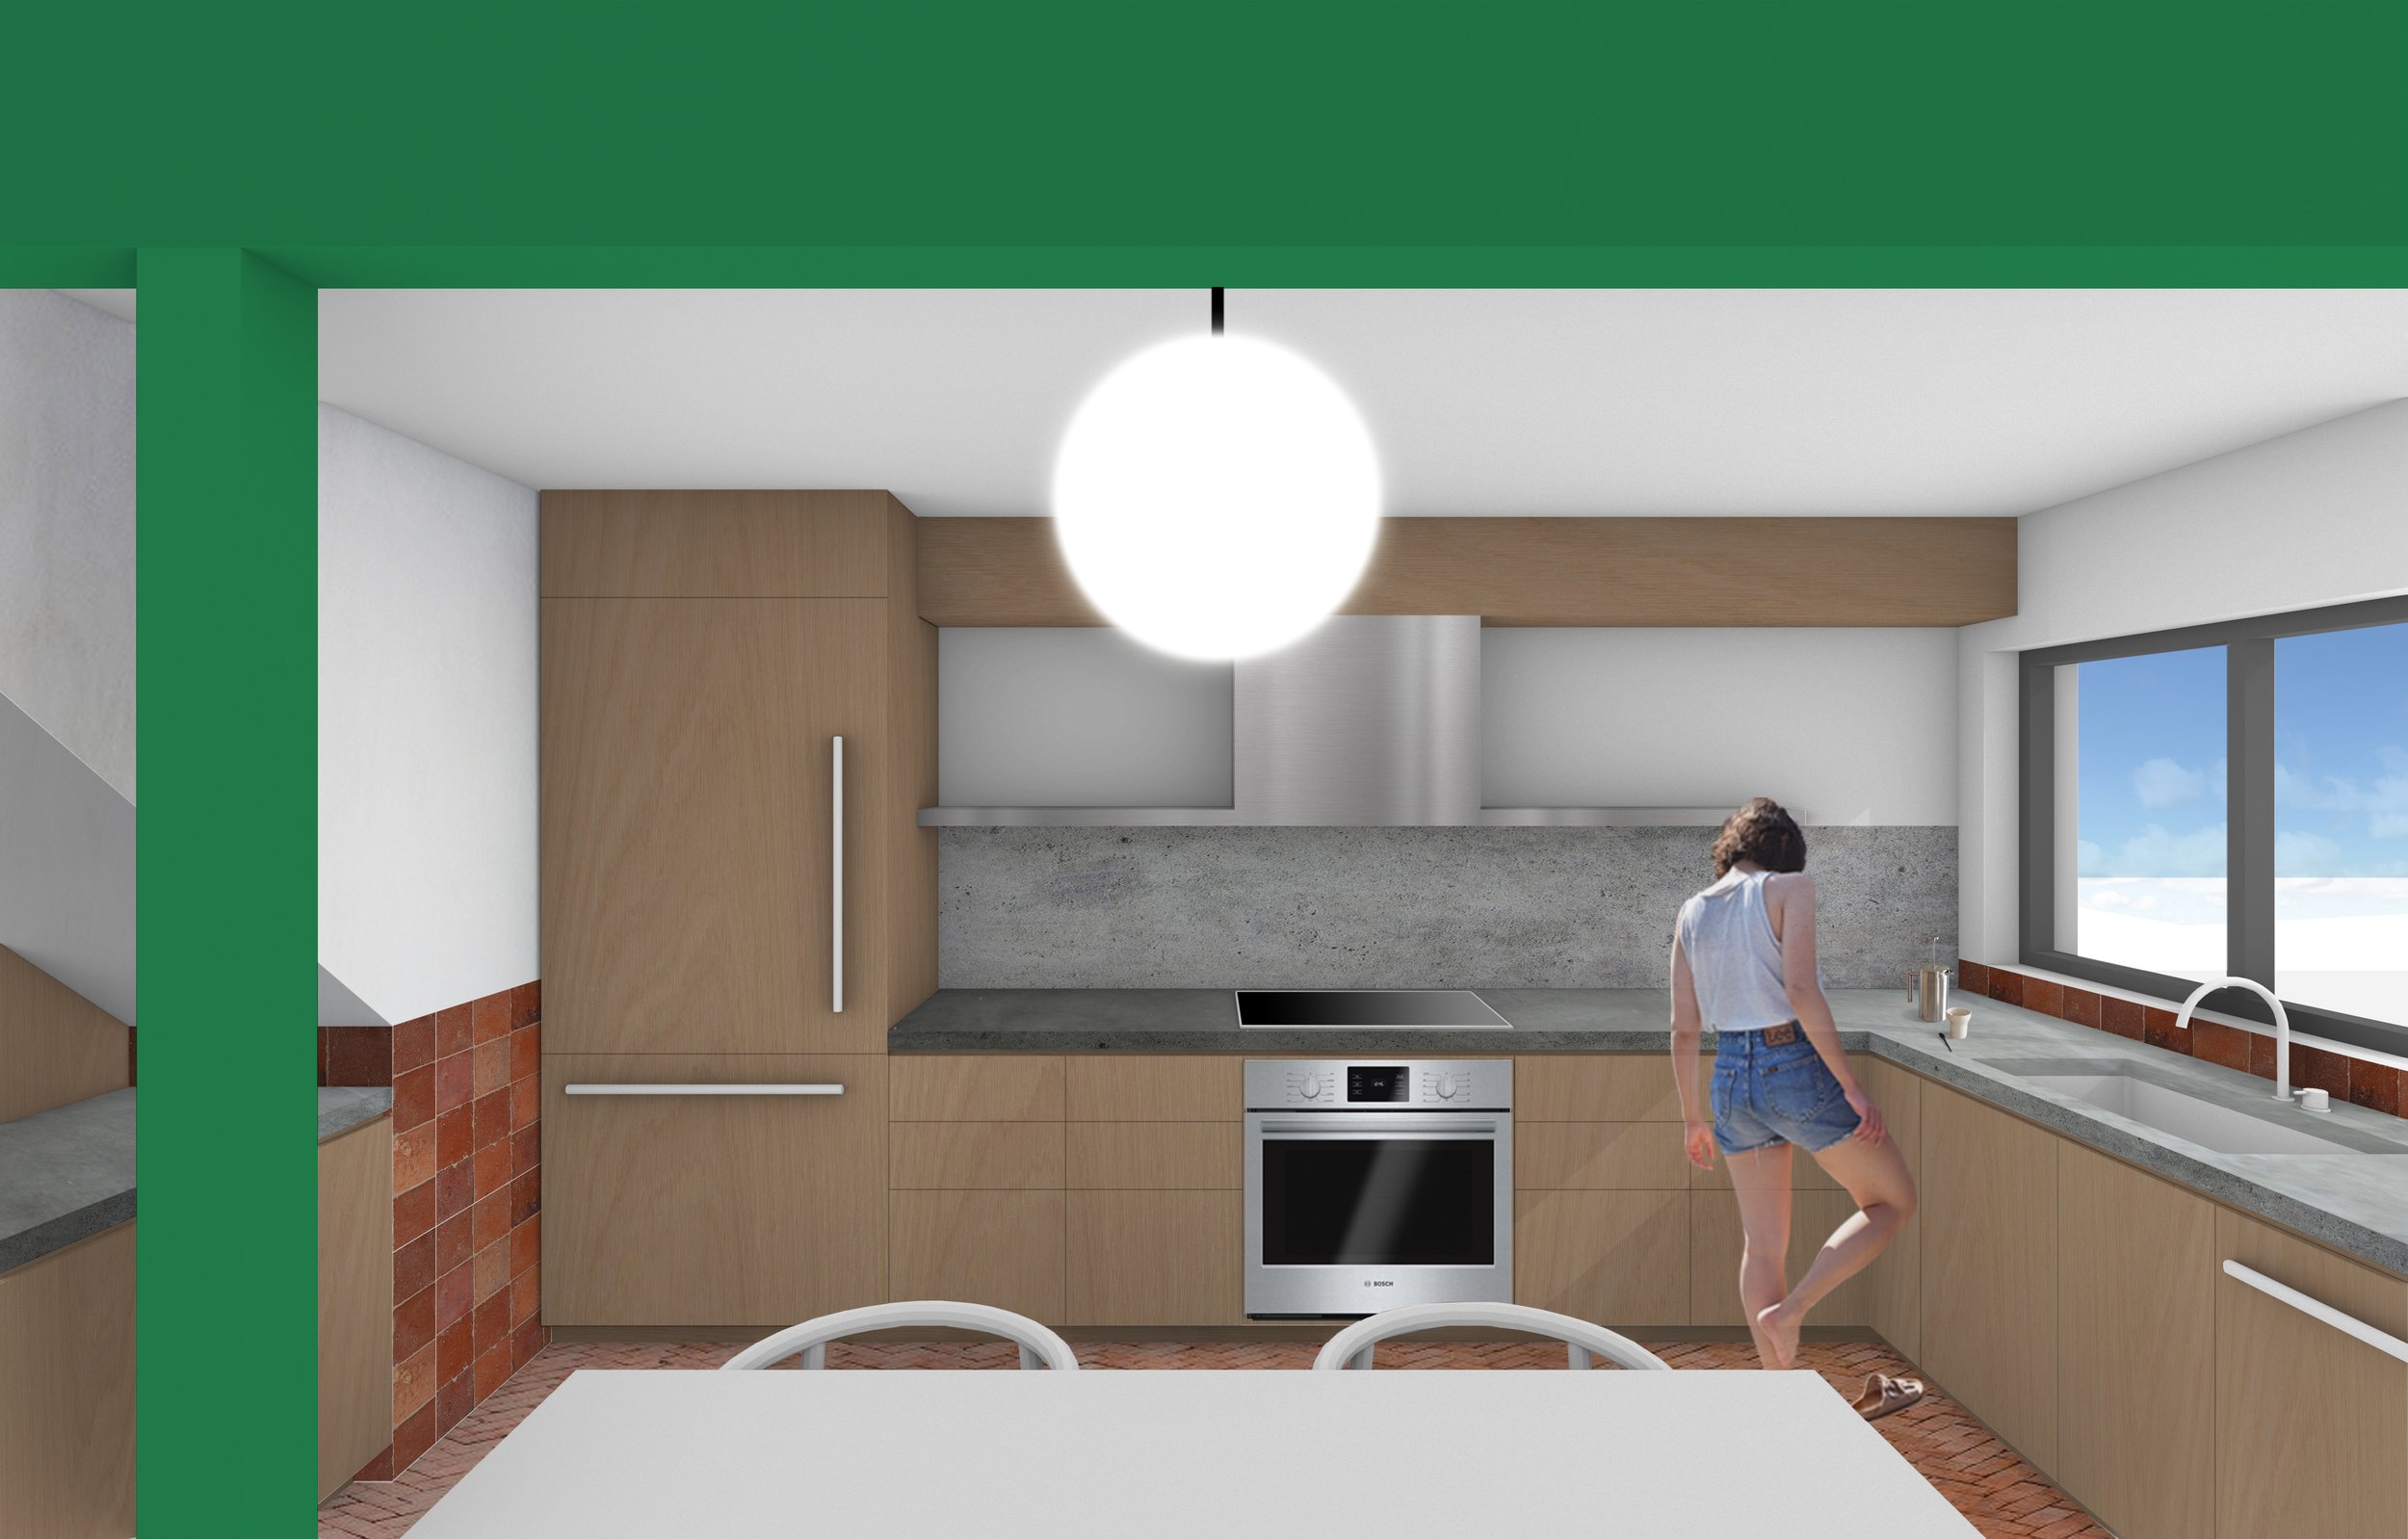 East Williamsburg Townhouse Kitchen Concept